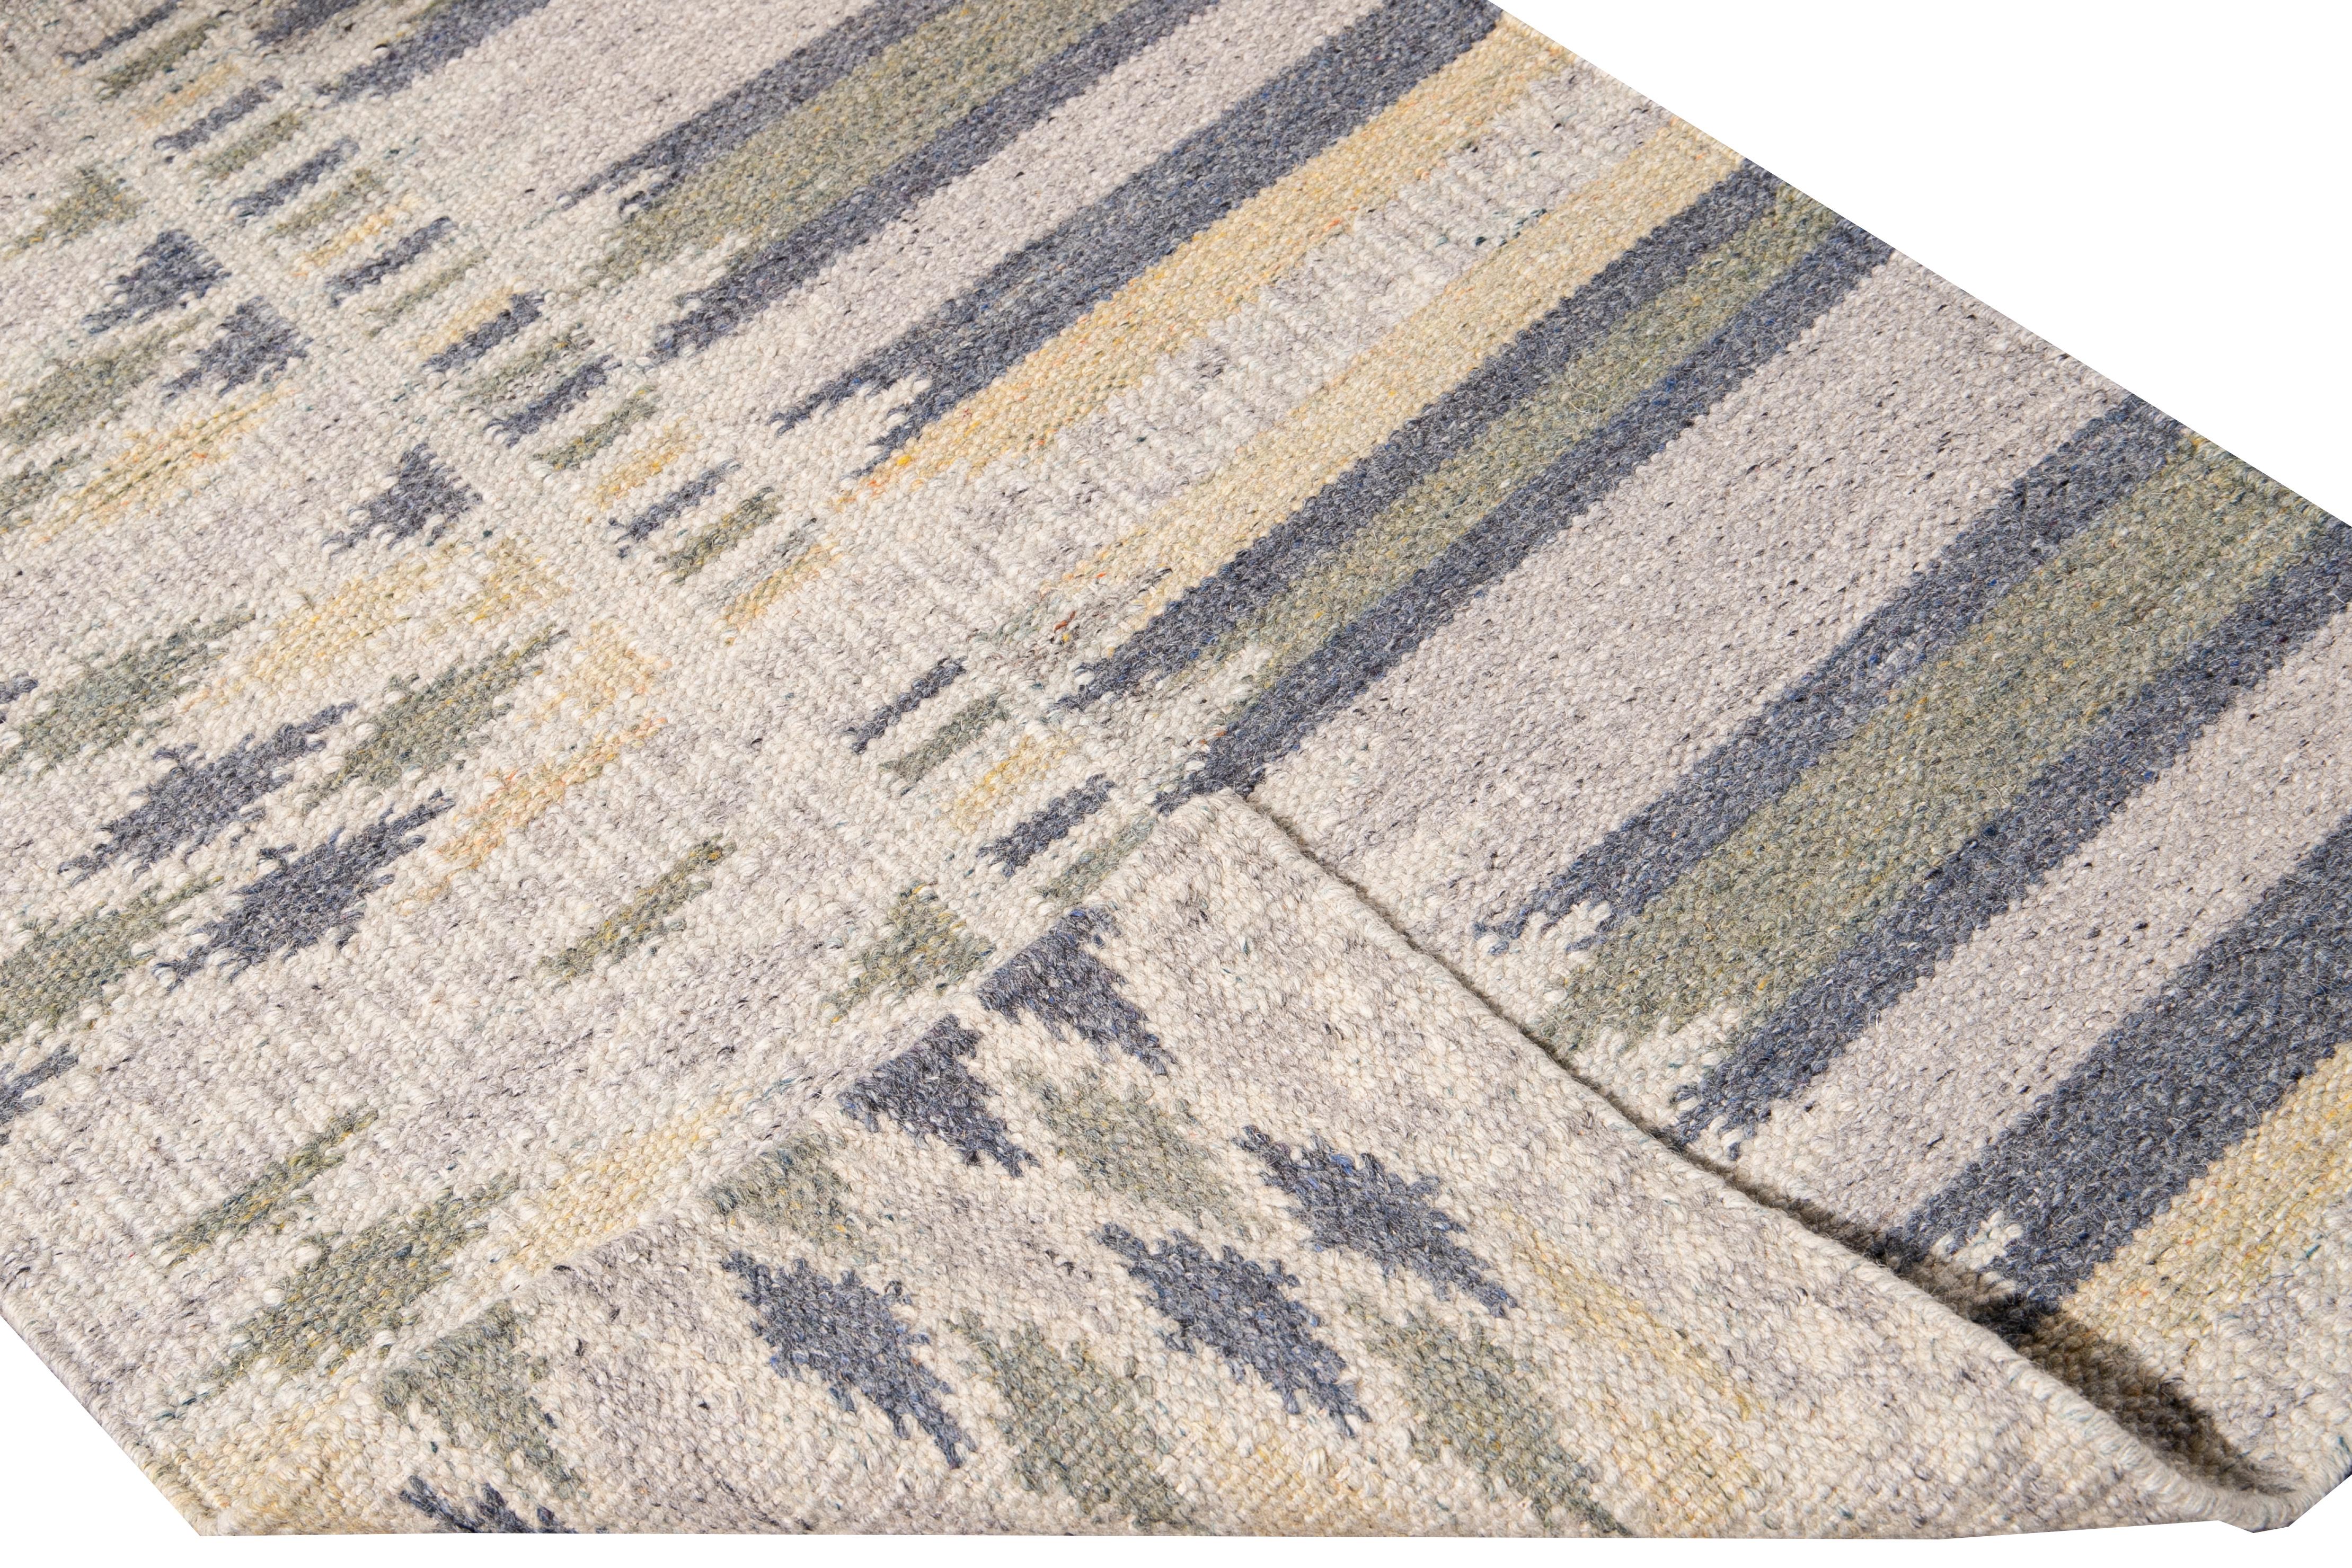 Beautiful modern long Swedish hand-knotted wool runner with a beige field. This Swedish runner has accents of blue, green, and yellow in an all-over geometric abstract design.

This rug measures: 3'2